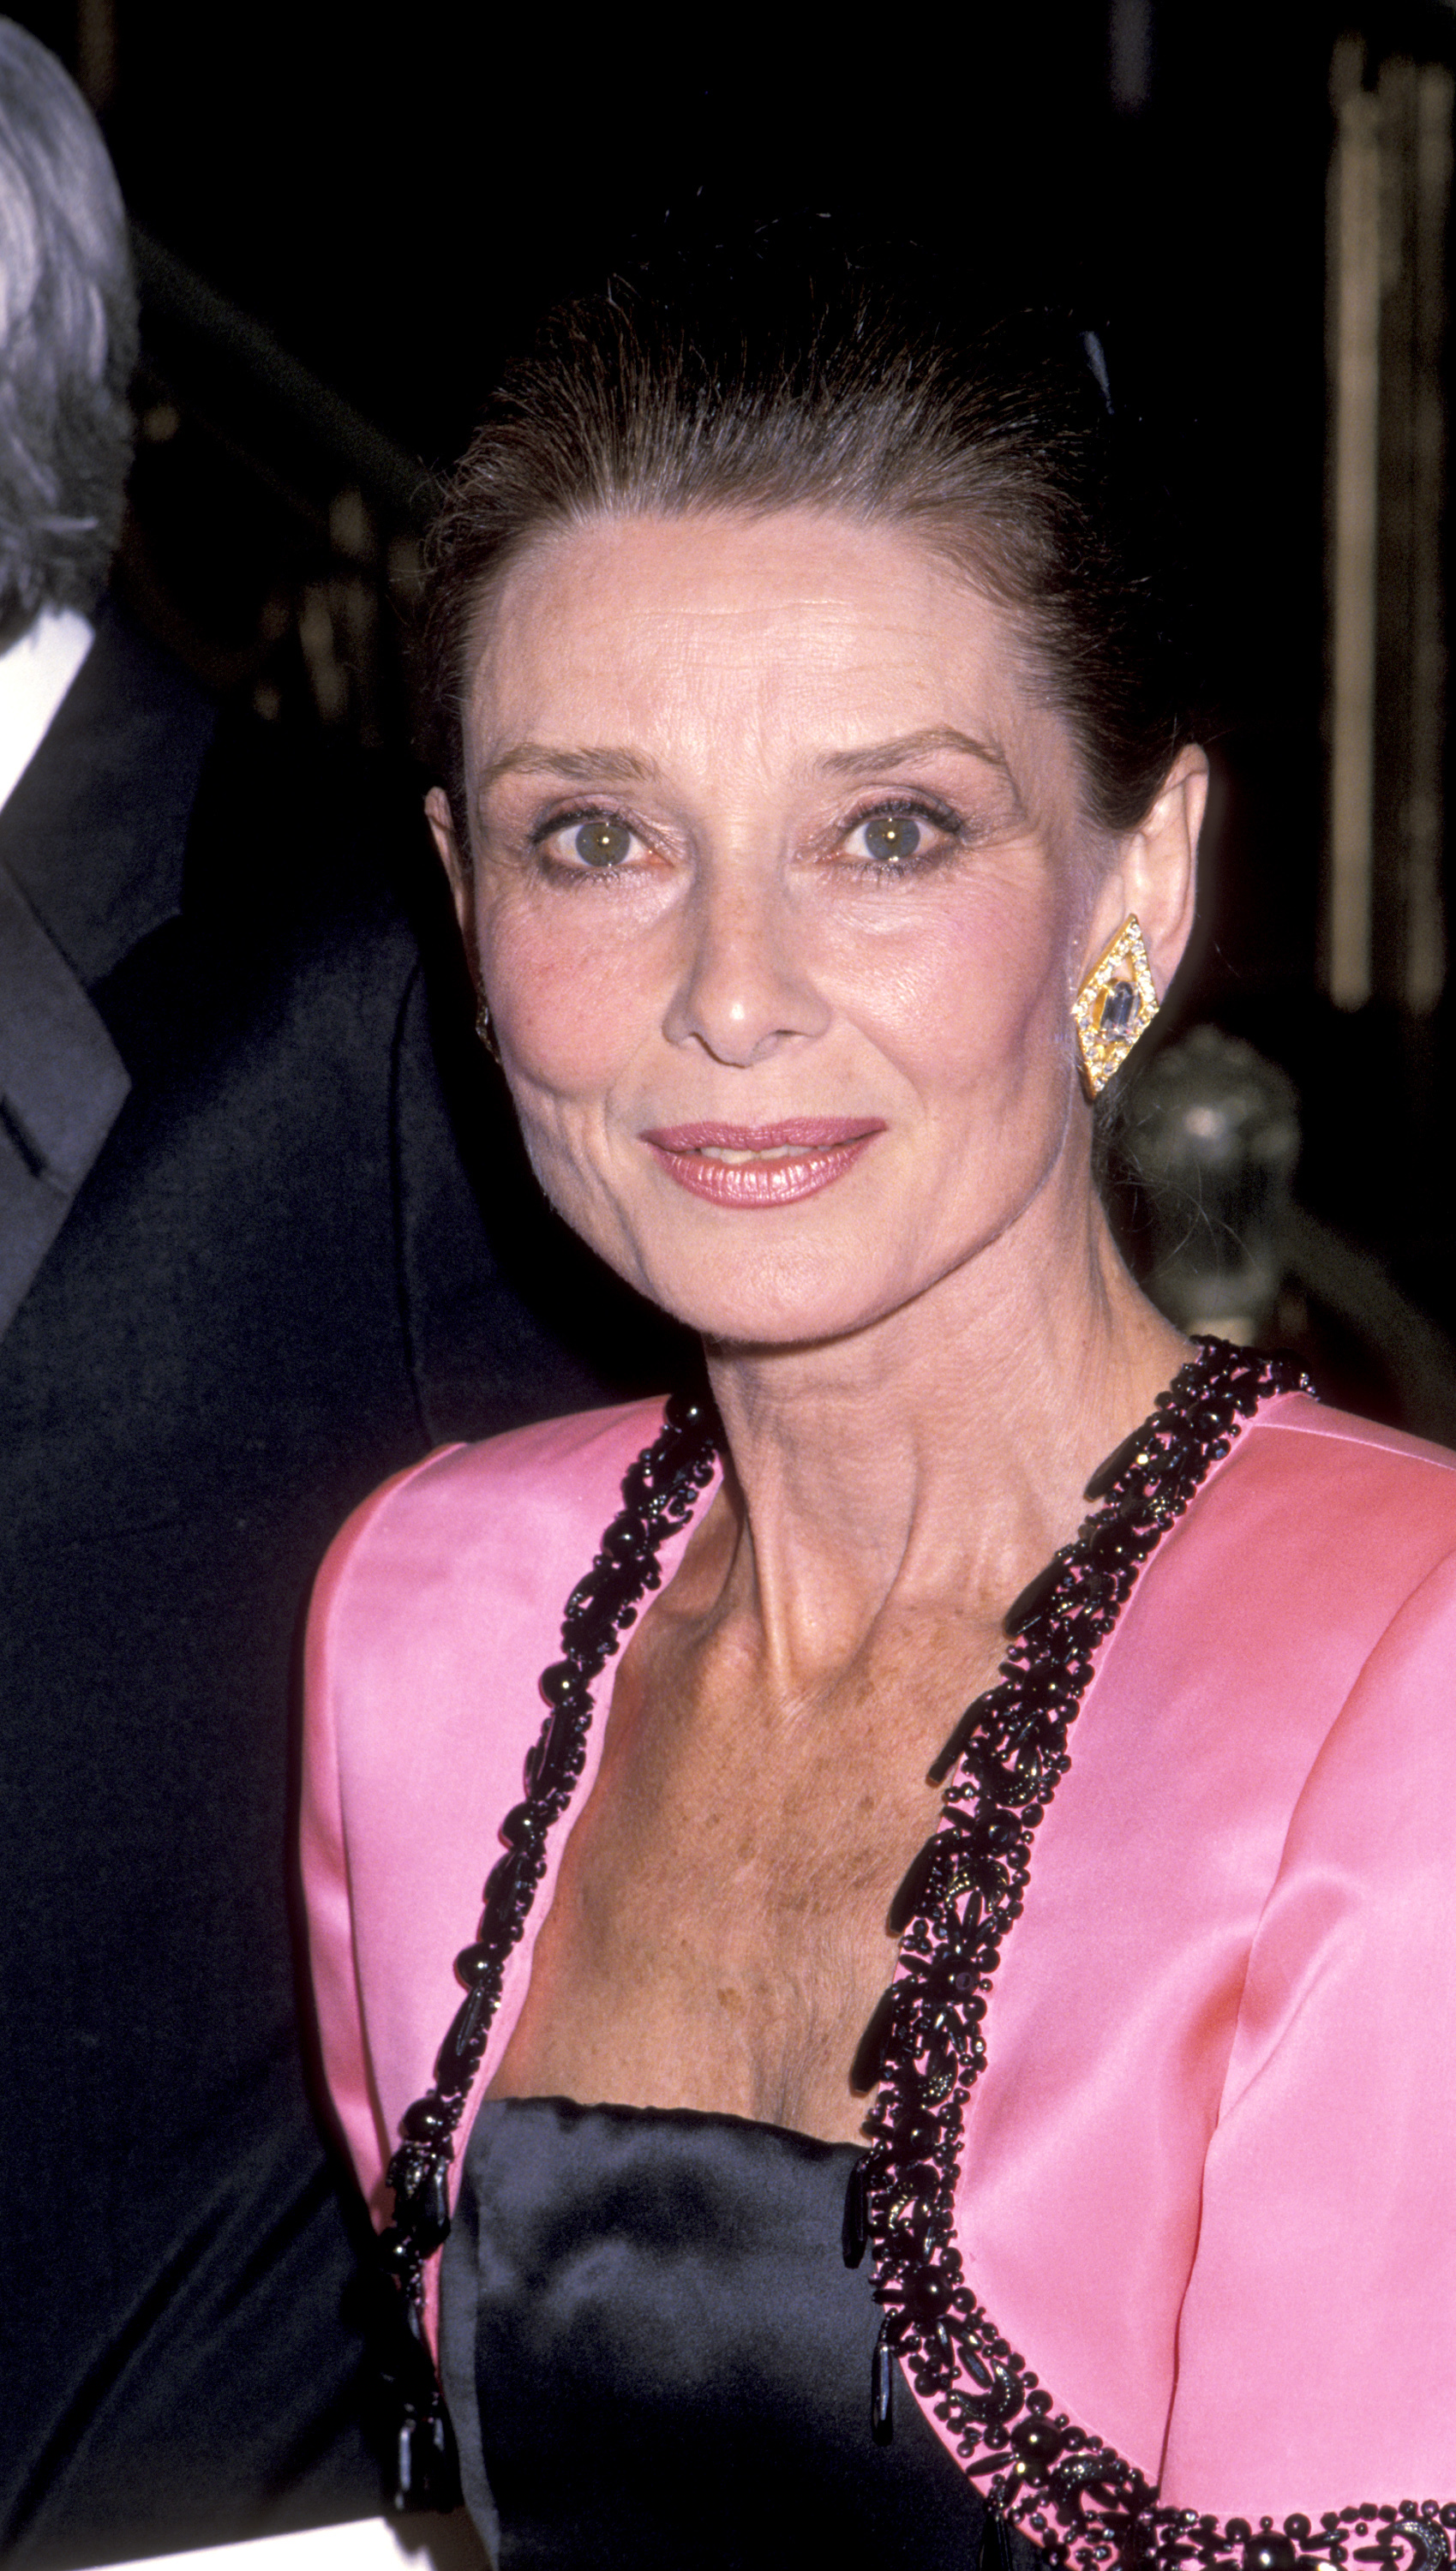 Audrey Hepburn during 1st Annual Lighthouse for the Blind, at the Winternight Awards Gala in New York City, on November 30, 1988. | Source: Getty Images